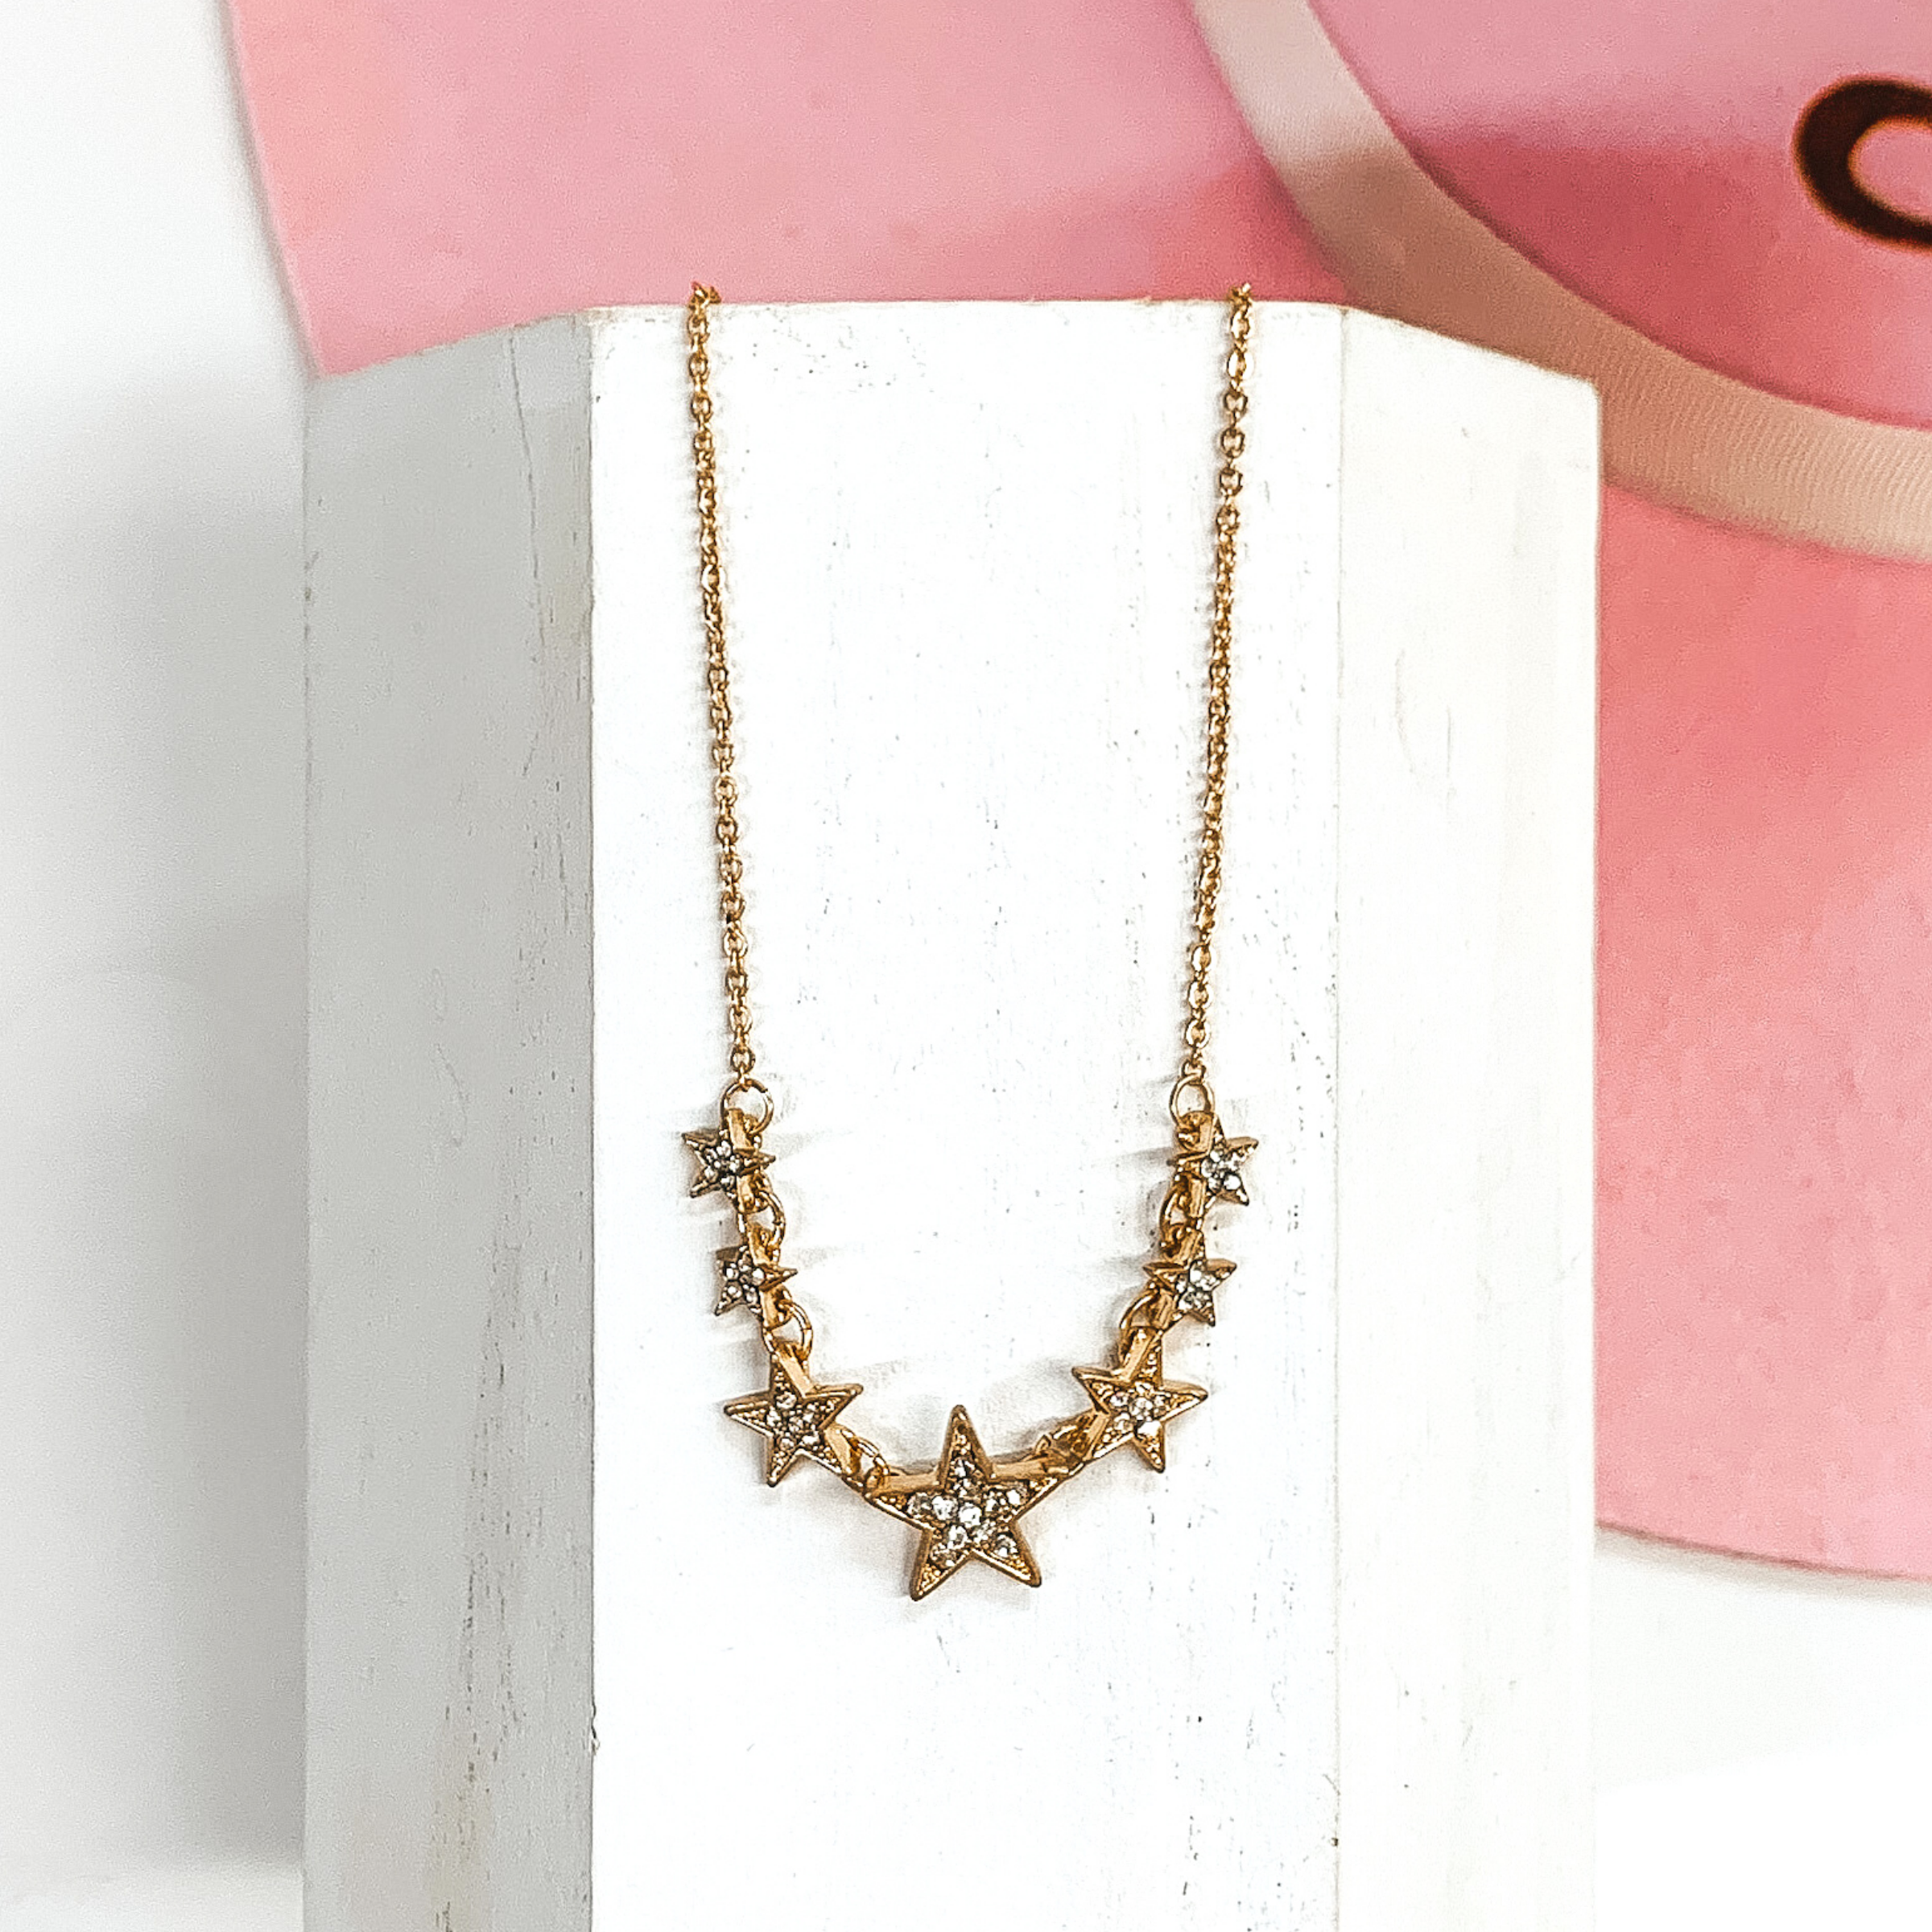 Simple Chain Necklace and Star Charms with Clear Crystals in Gold - Giddy Up Glamour Boutique